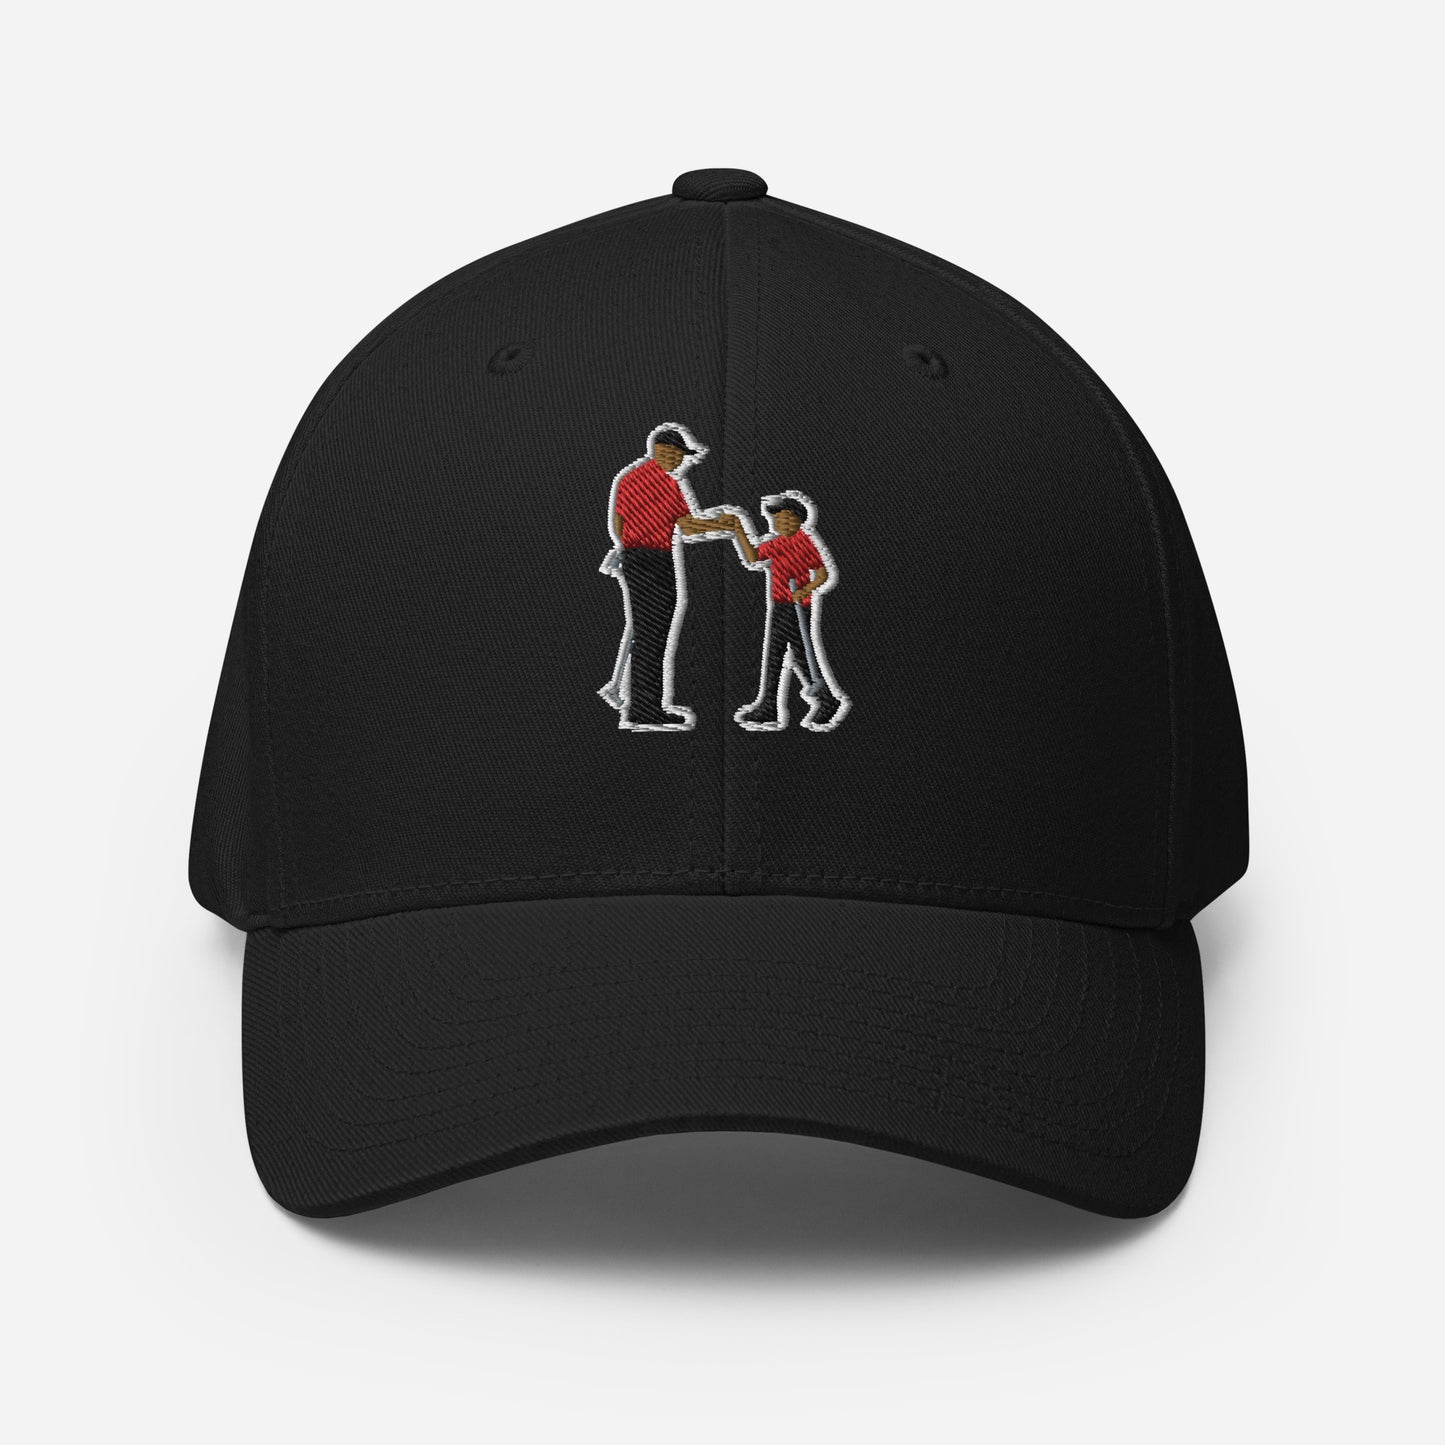 Tiger and Charlie Cap - PNC Championship 2021